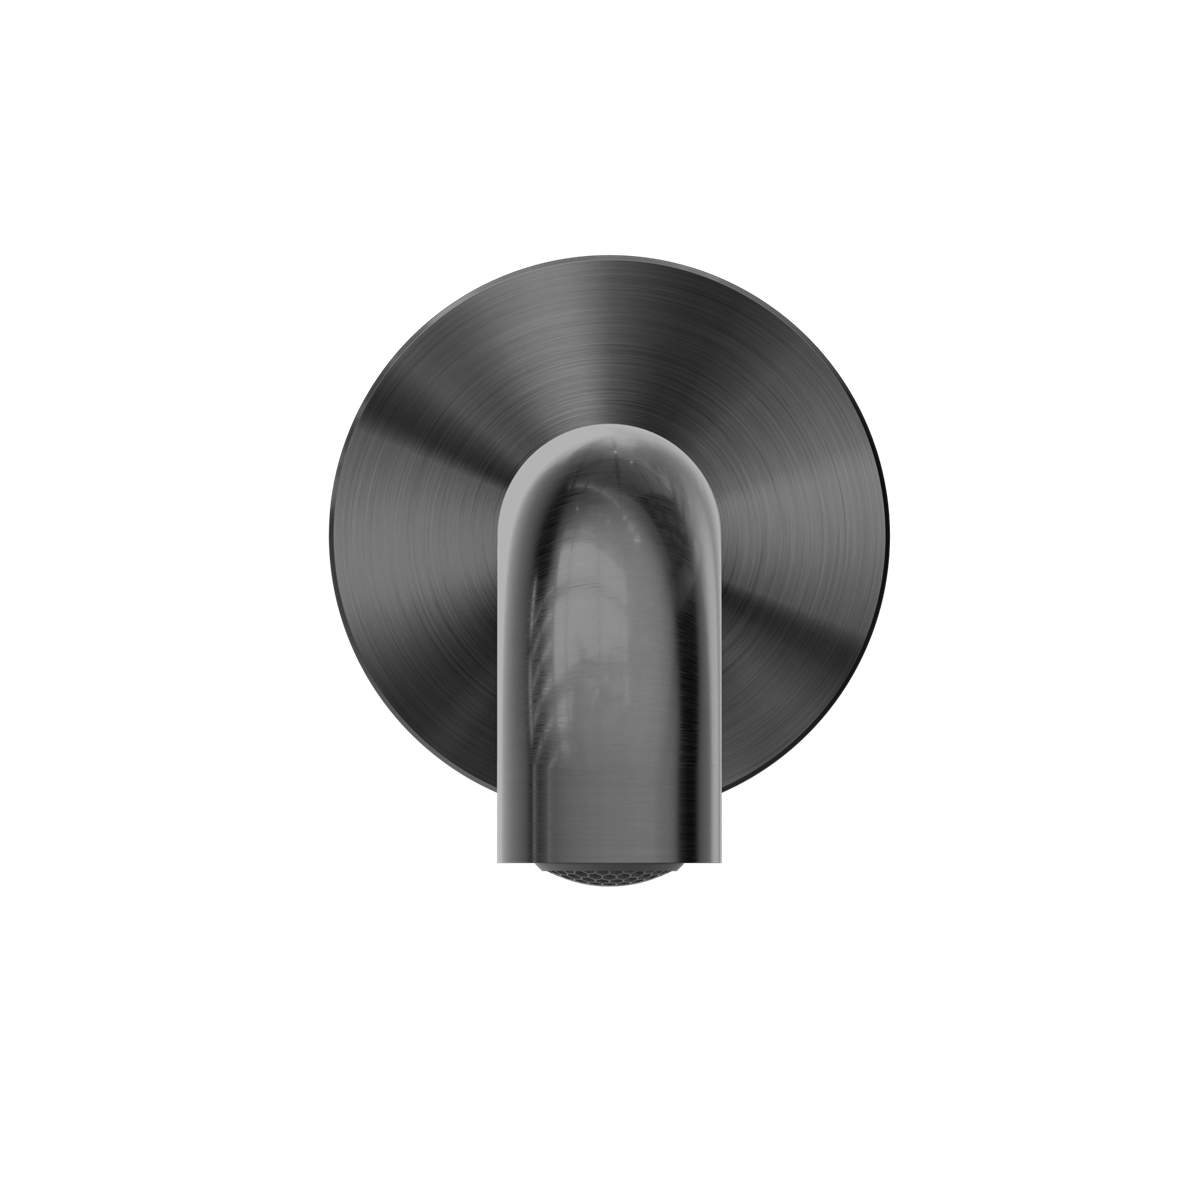 NERO MECCA BASIN/ BATH SPOUT GRAPHITE (AVAILABLE IN 120MM, 160MM, 185MM, 230MM AND 260MM)